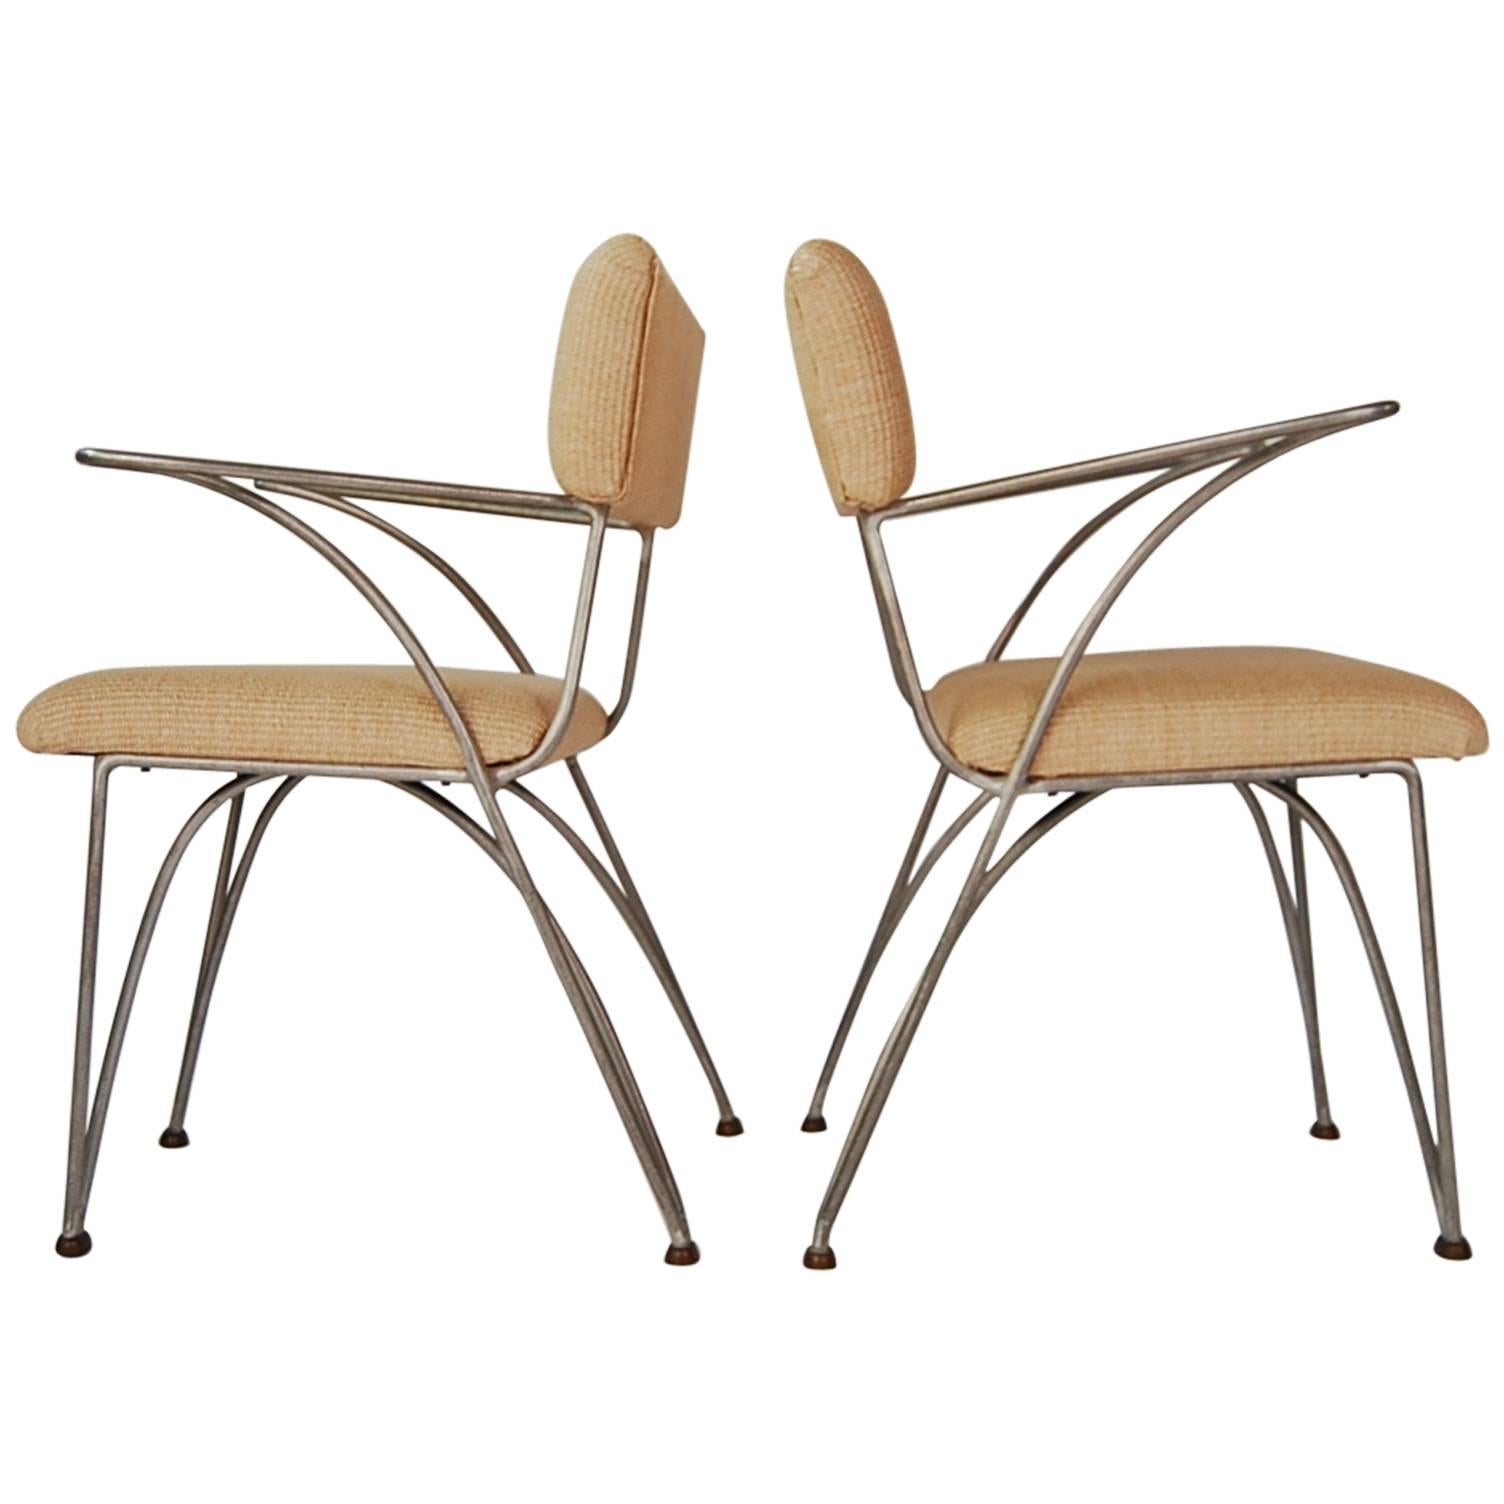 Pair of Modernist Chairs in Aluminum and Bronze